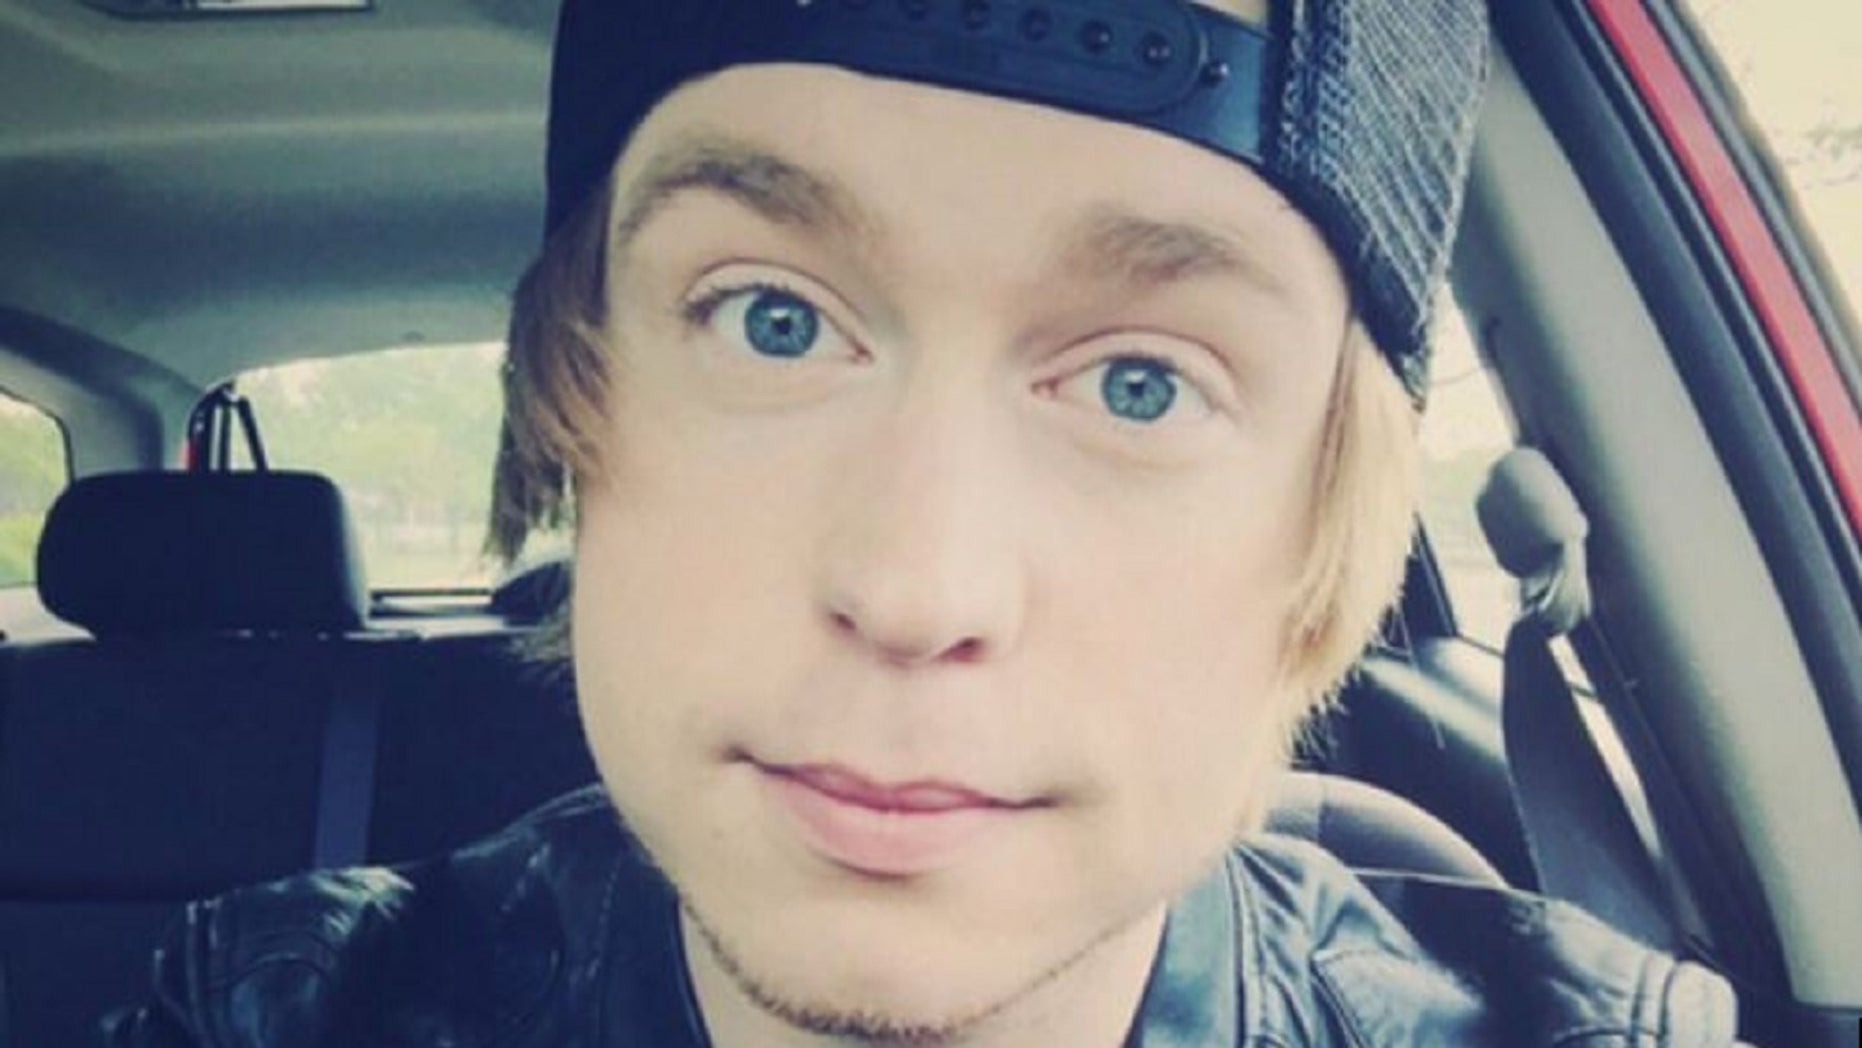 YouTube star Austin Jones pleads guilty to soliciting lewd photos from teen girls